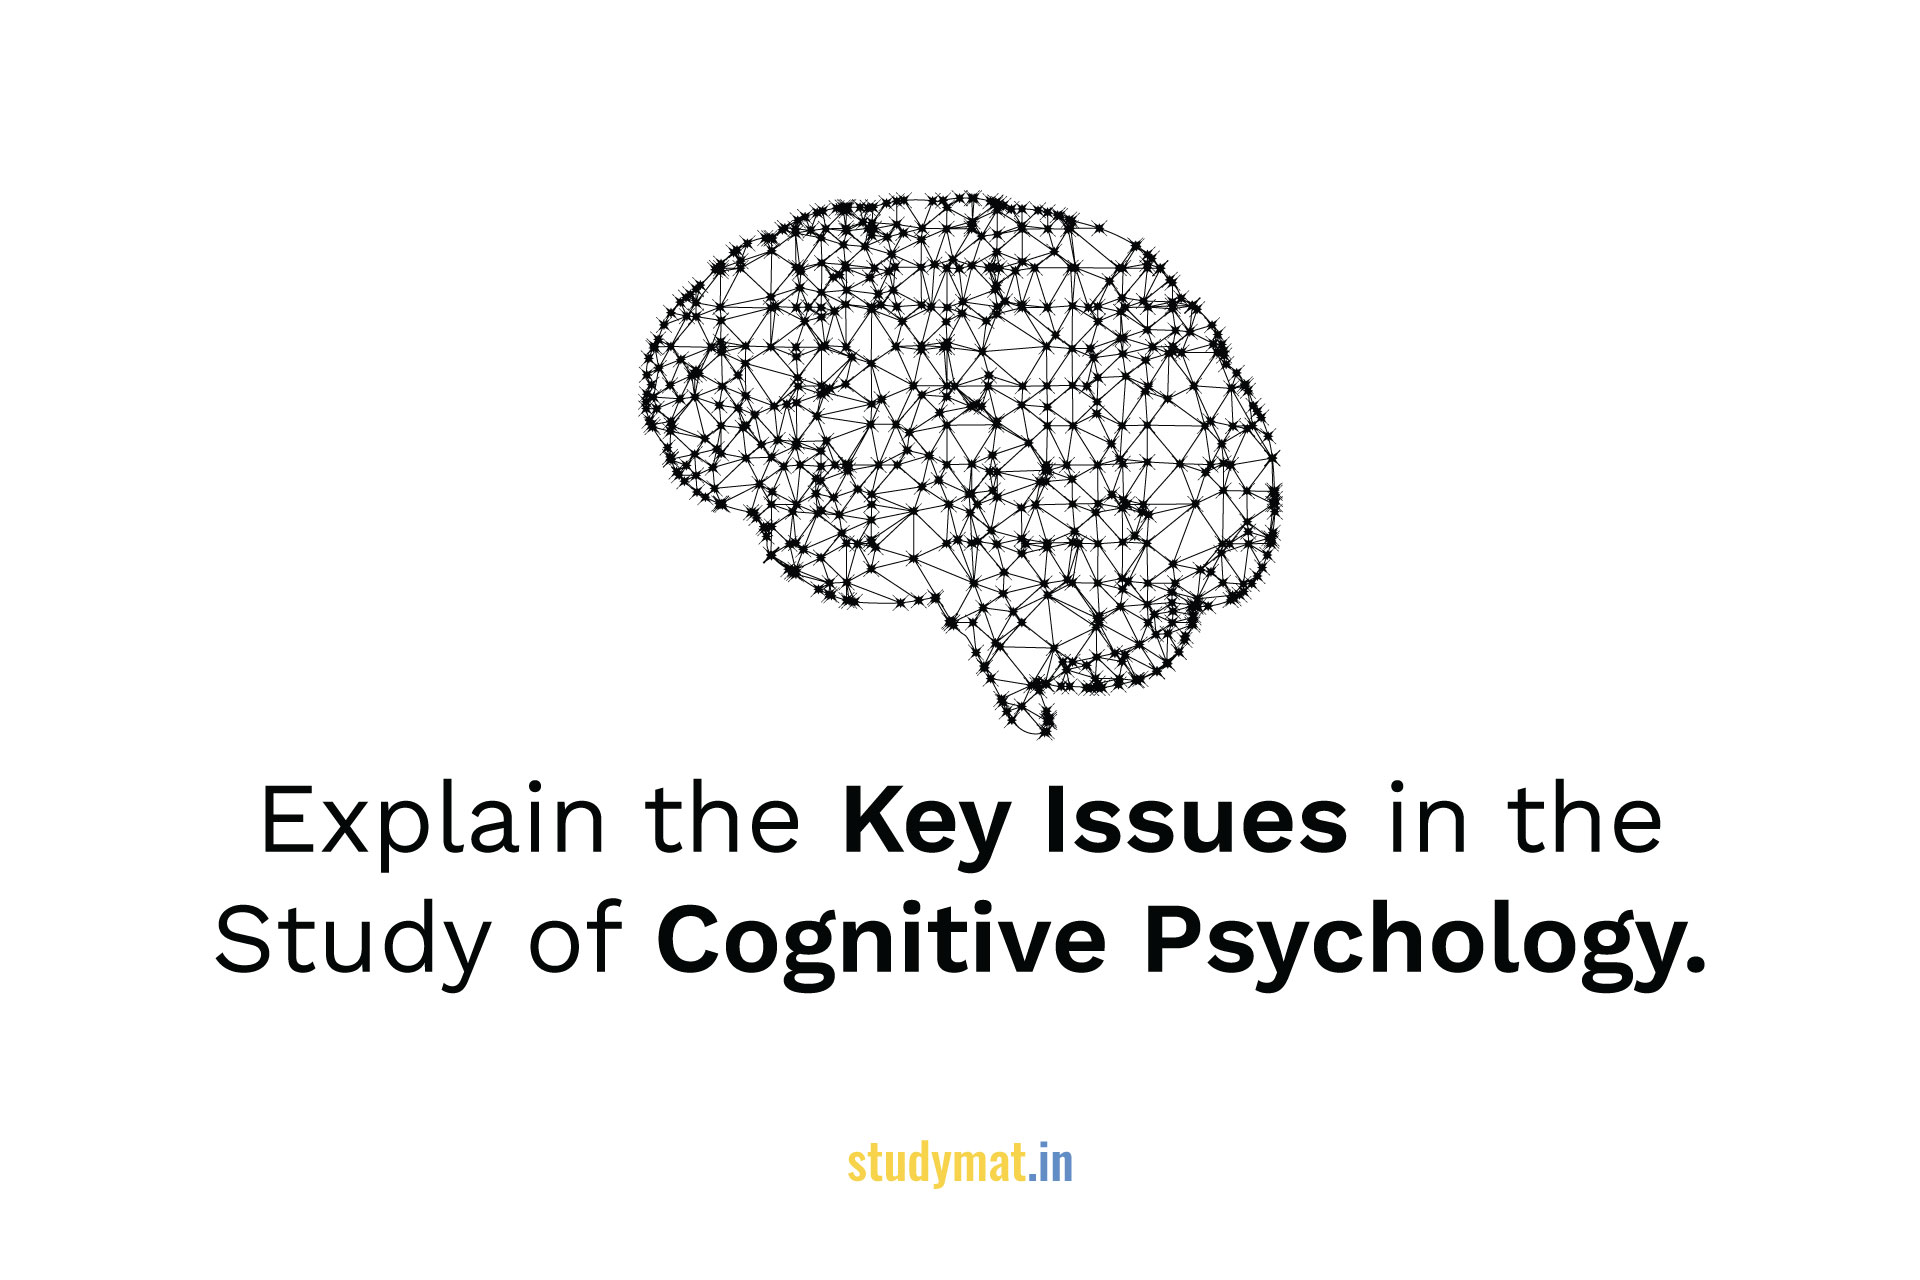 Key Issues in the Study of Cognitive Psychology. - STUDYMAT